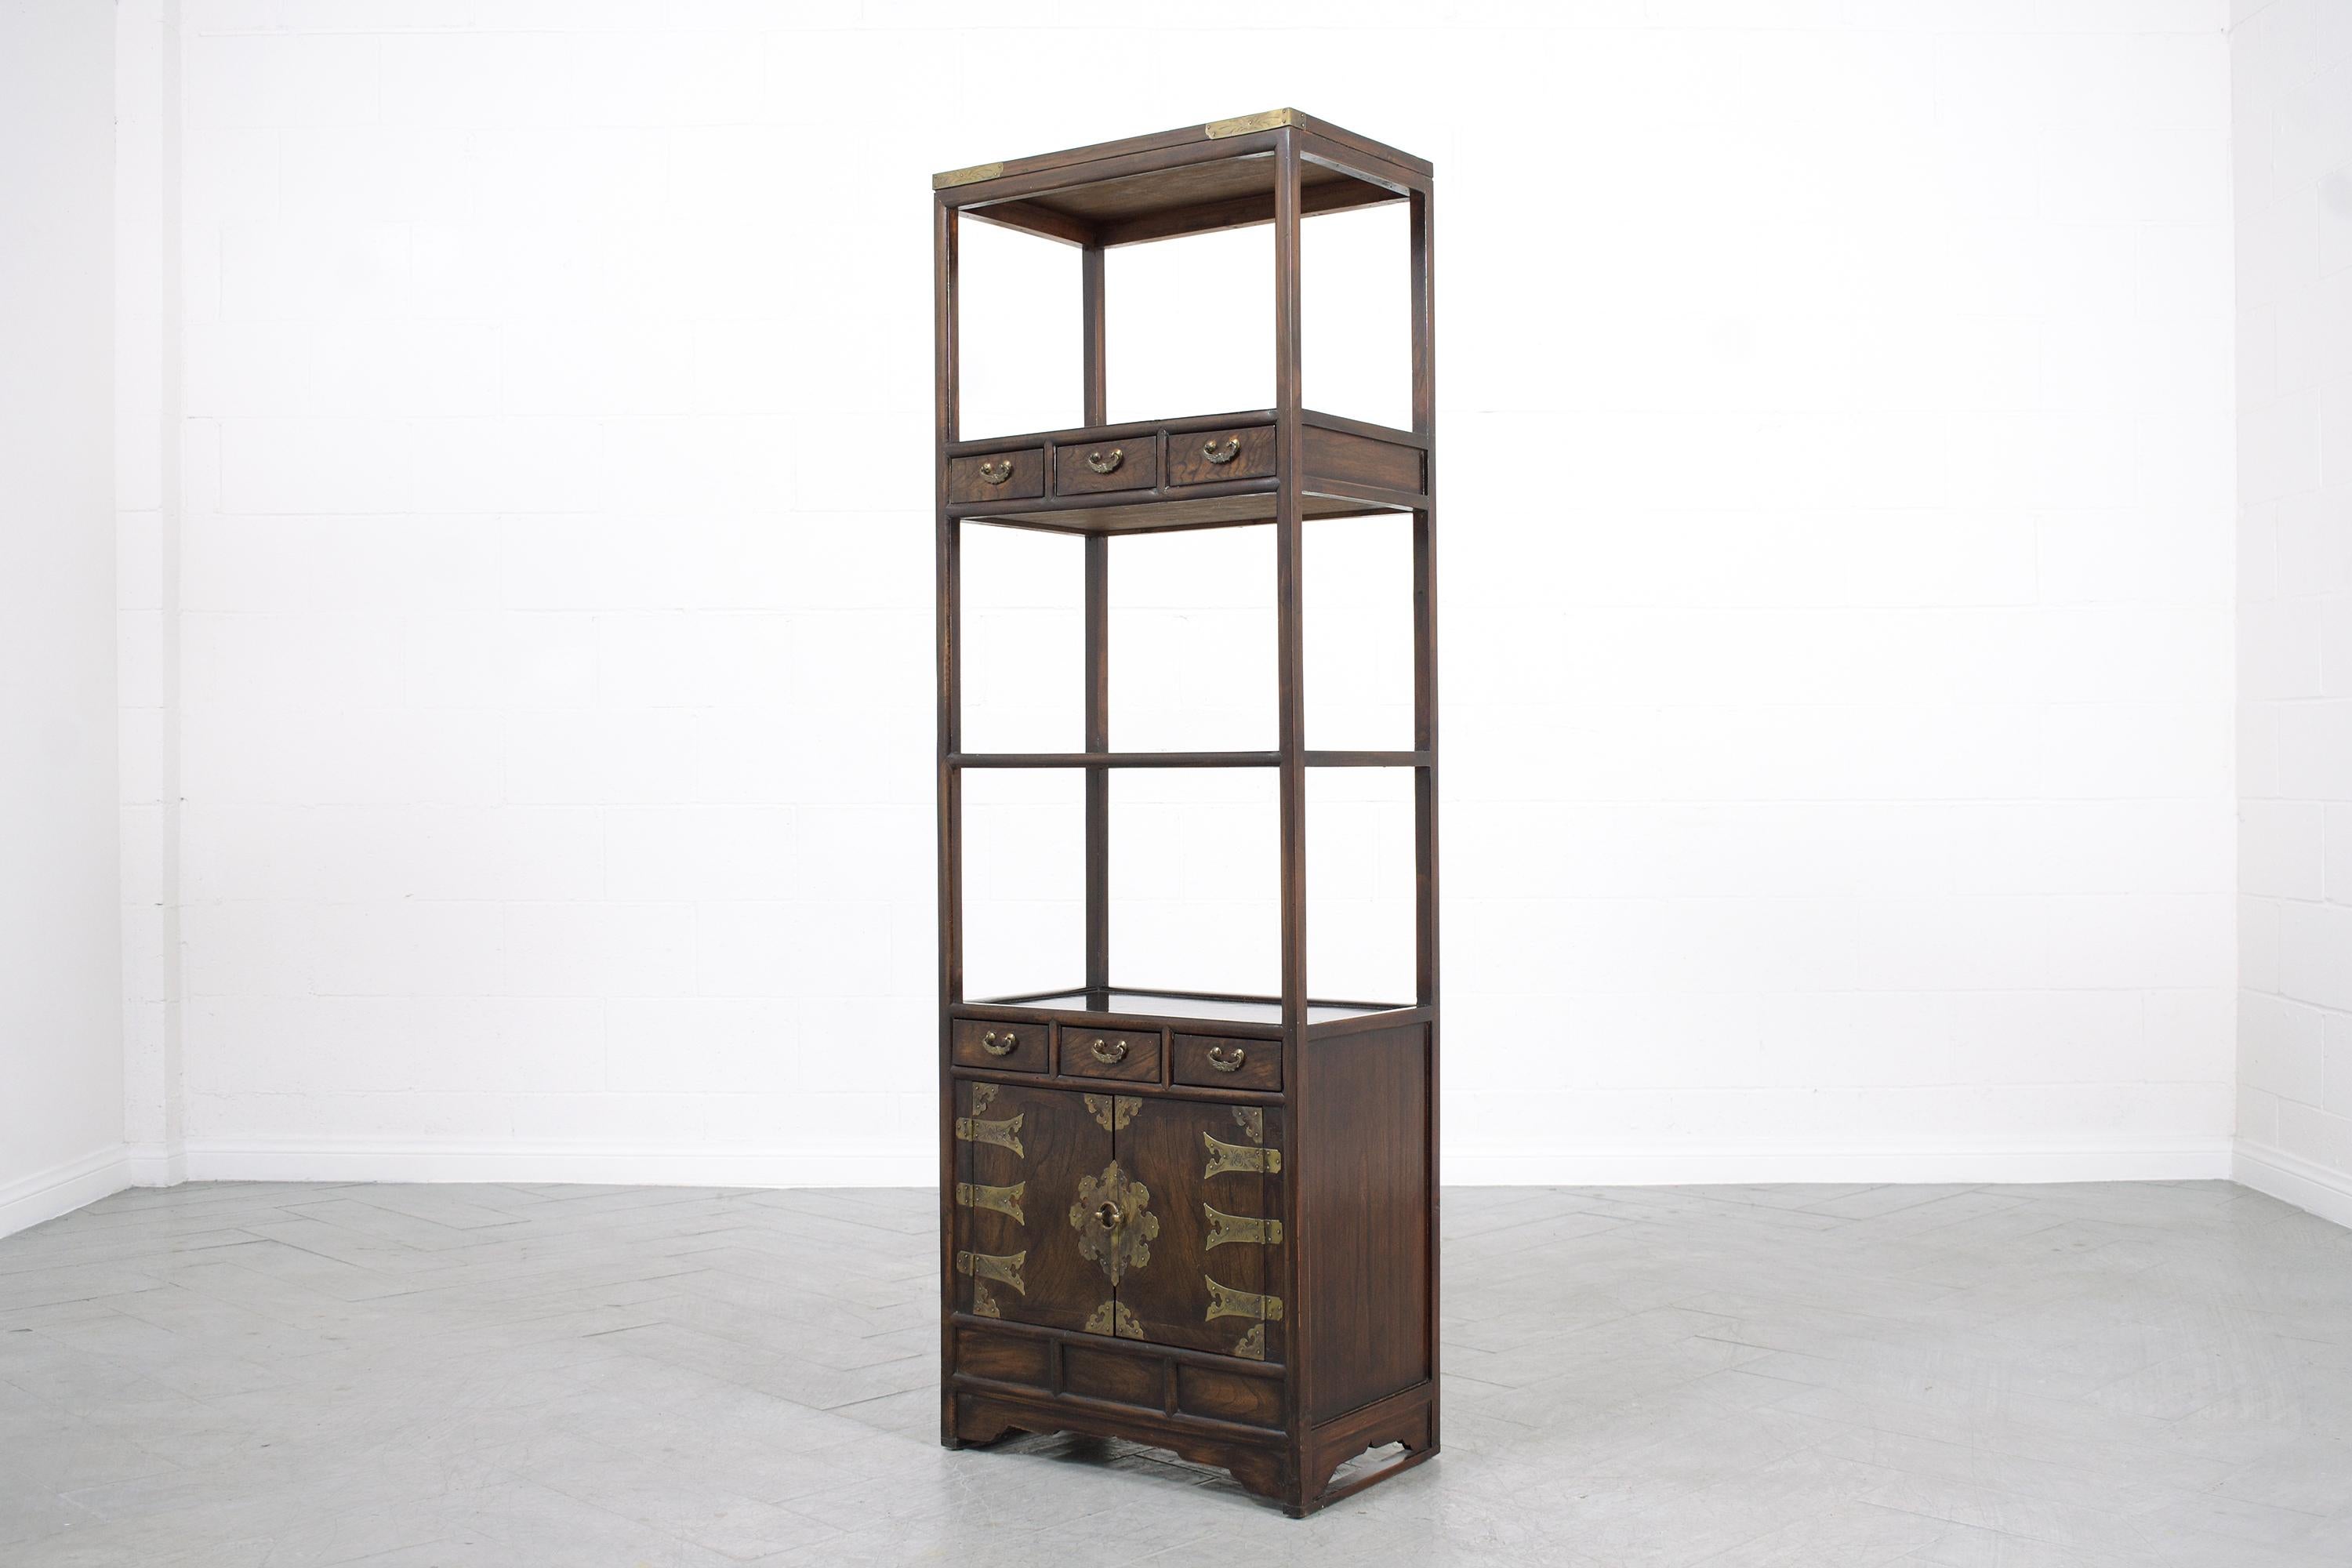 Vintage Chinese Elm Wood Bookcase: A Statement of Timeless Craftsmanship 4